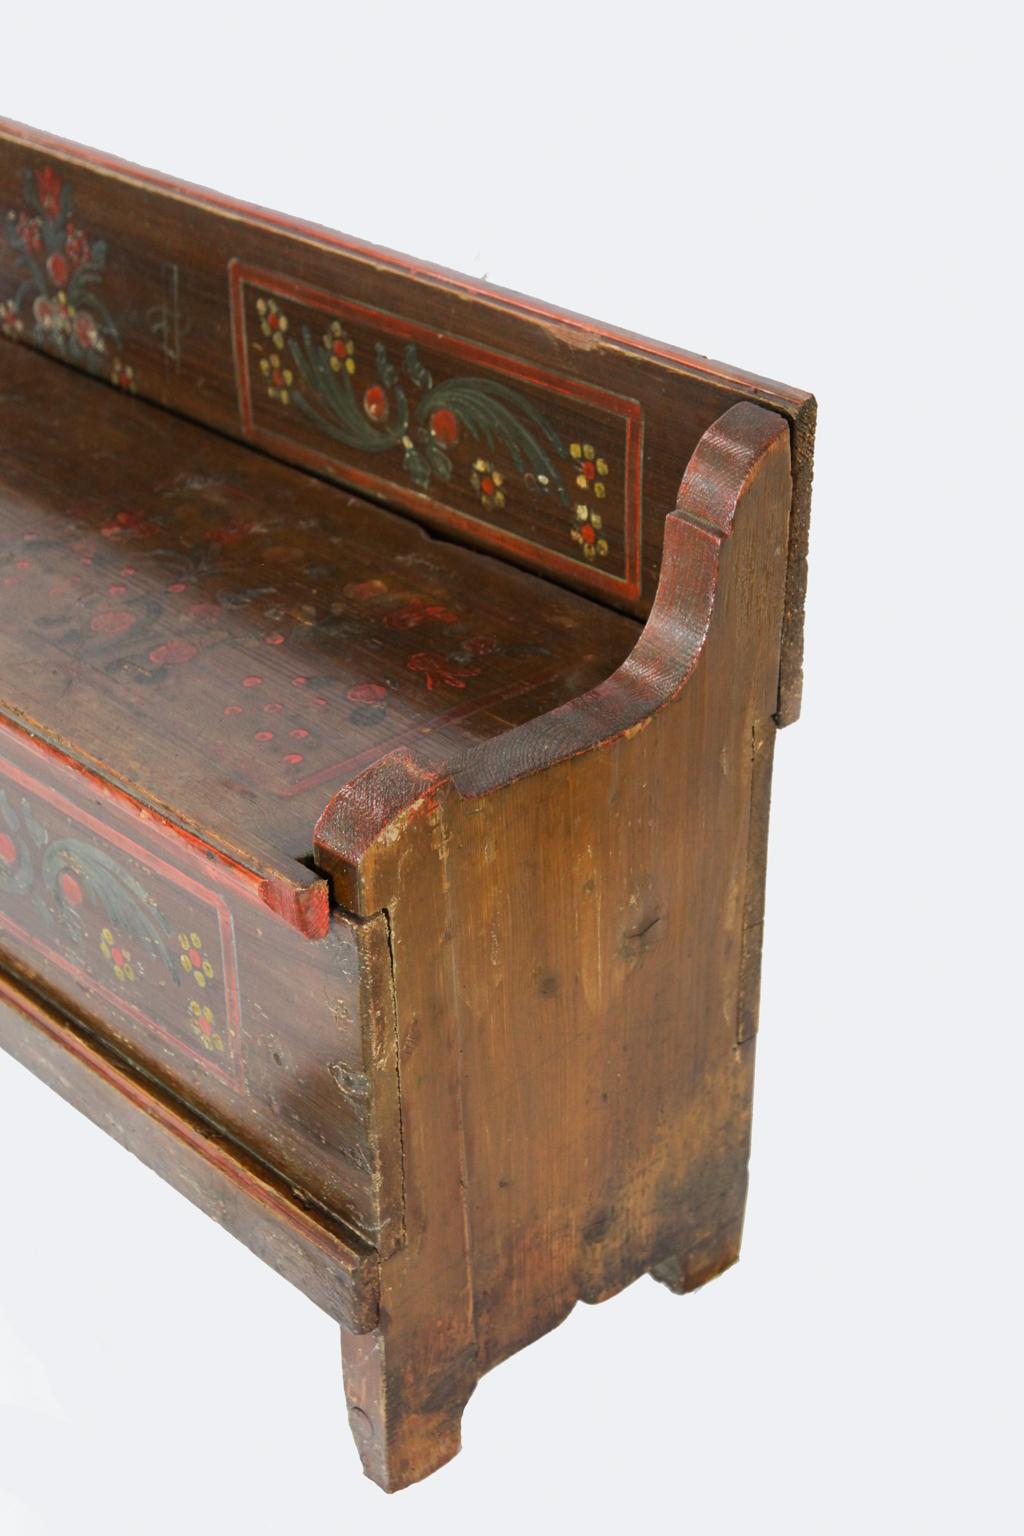 19th Century Long Painted Pine Lift Top Bench In Good Condition For Sale In Wilson, NC